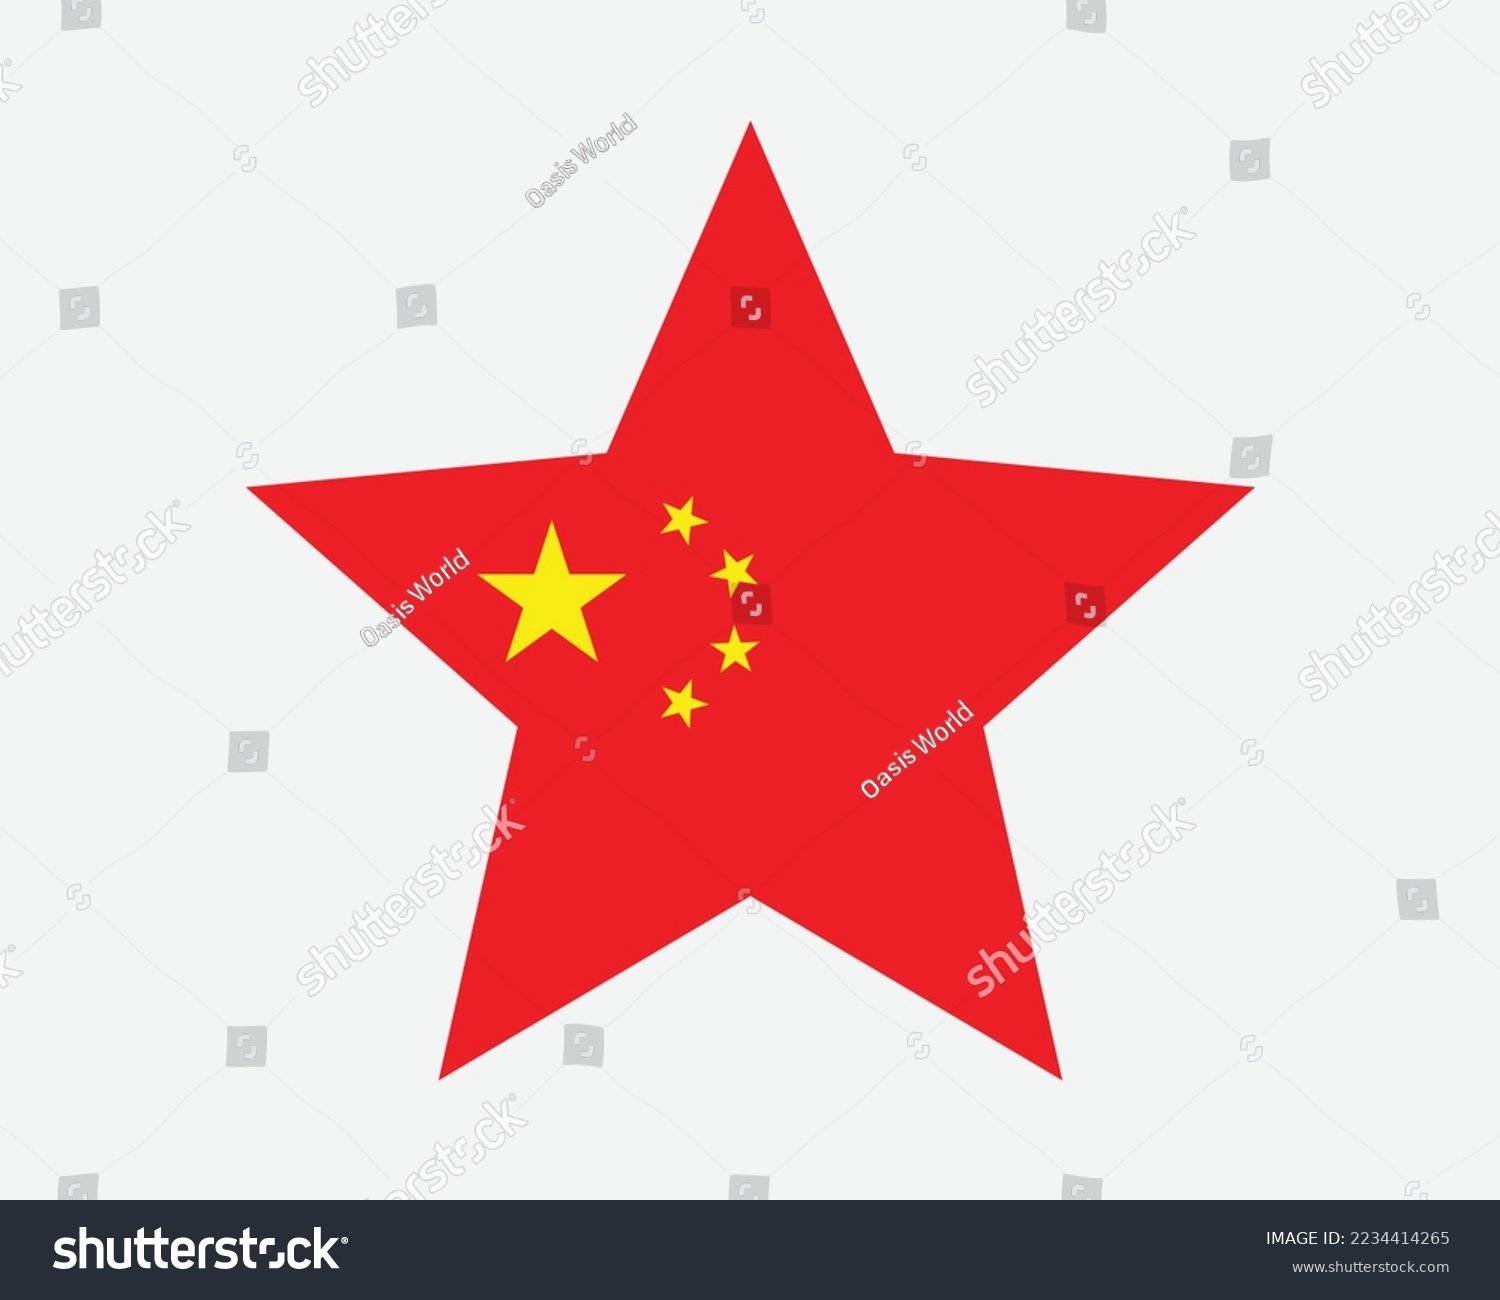 SVG of China Star Flag. Chinese Star Shape Flag. PRC Country National Banner Icon Symbol Vector 2D Flat Artwork Graphic Illustration svg